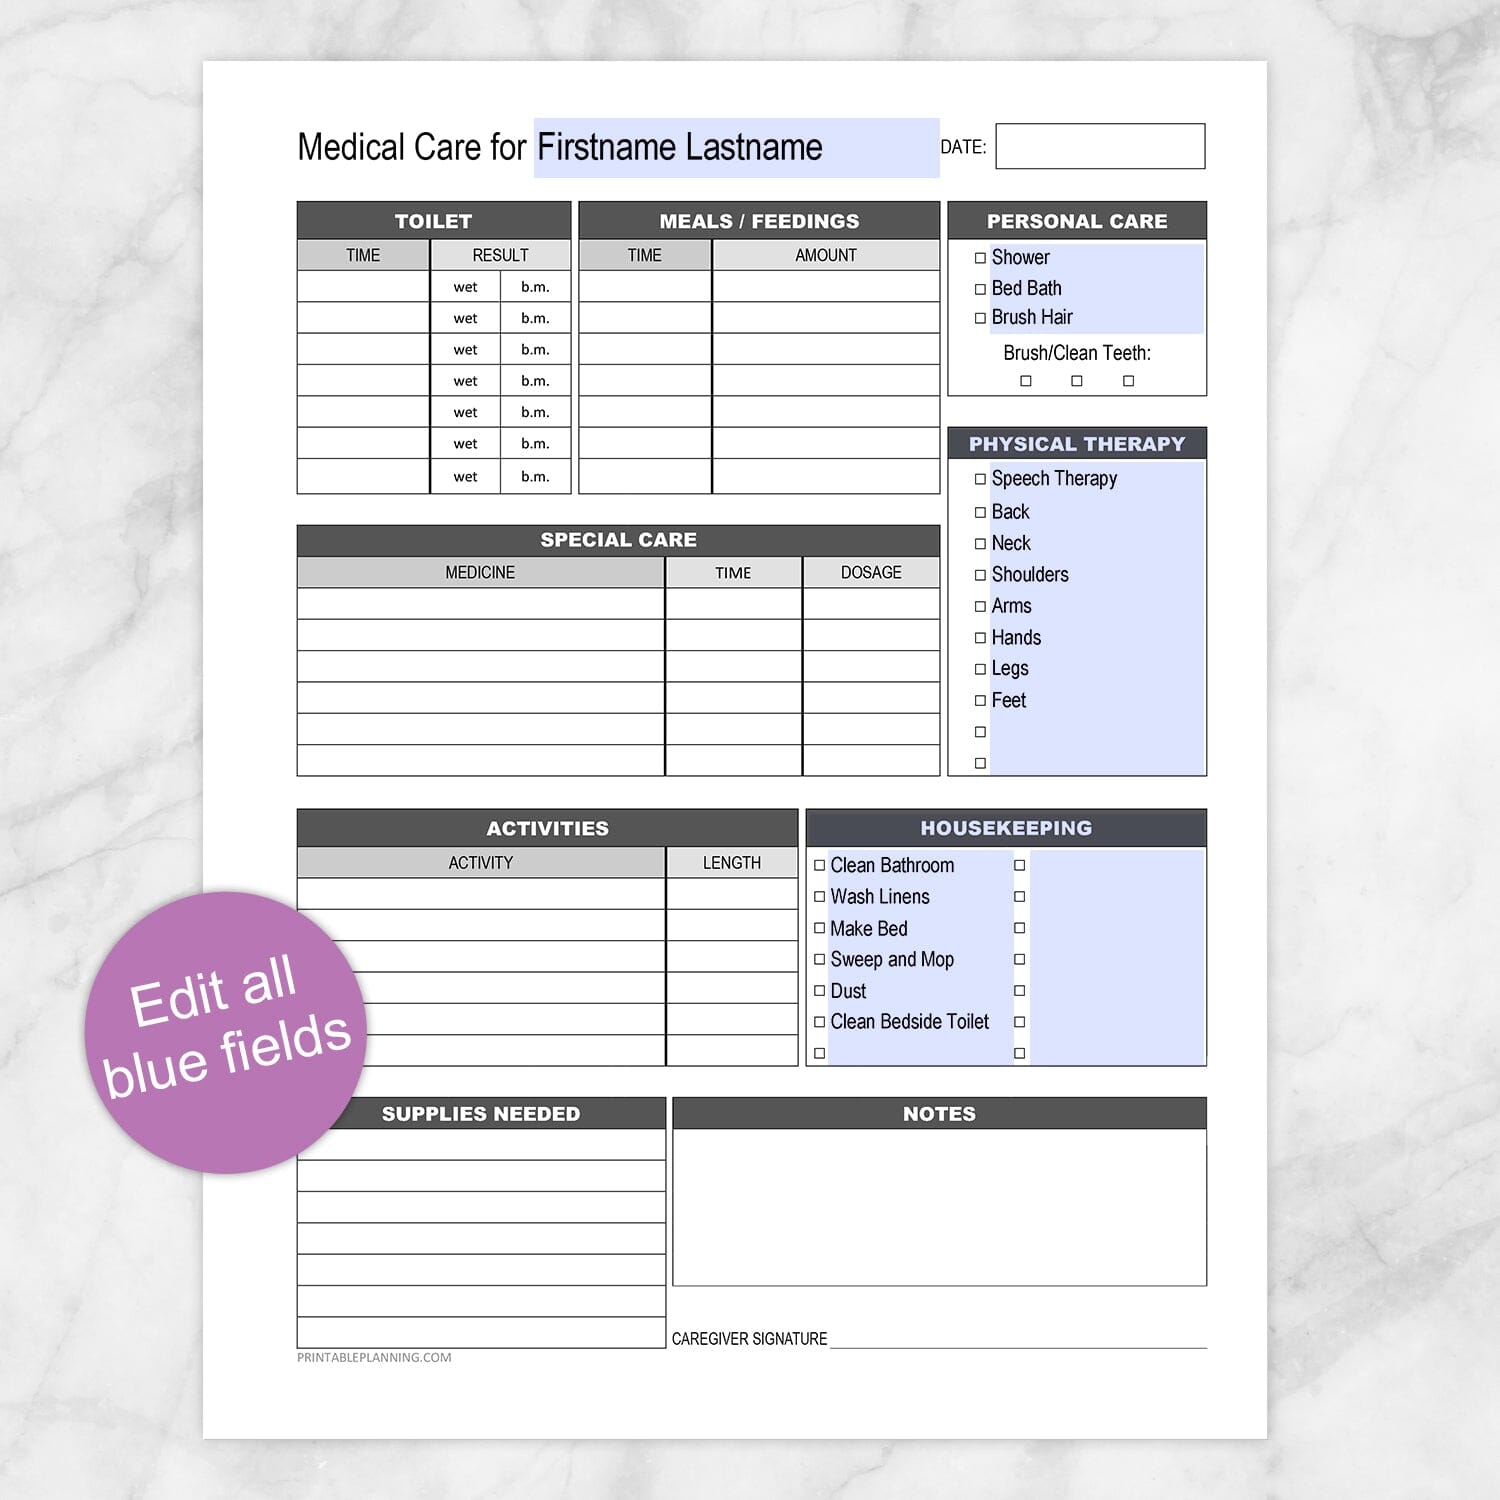 Printable Medical Care, Daily Care Sheet with Housekeeping at Printable Planning. Edit all blue fields.